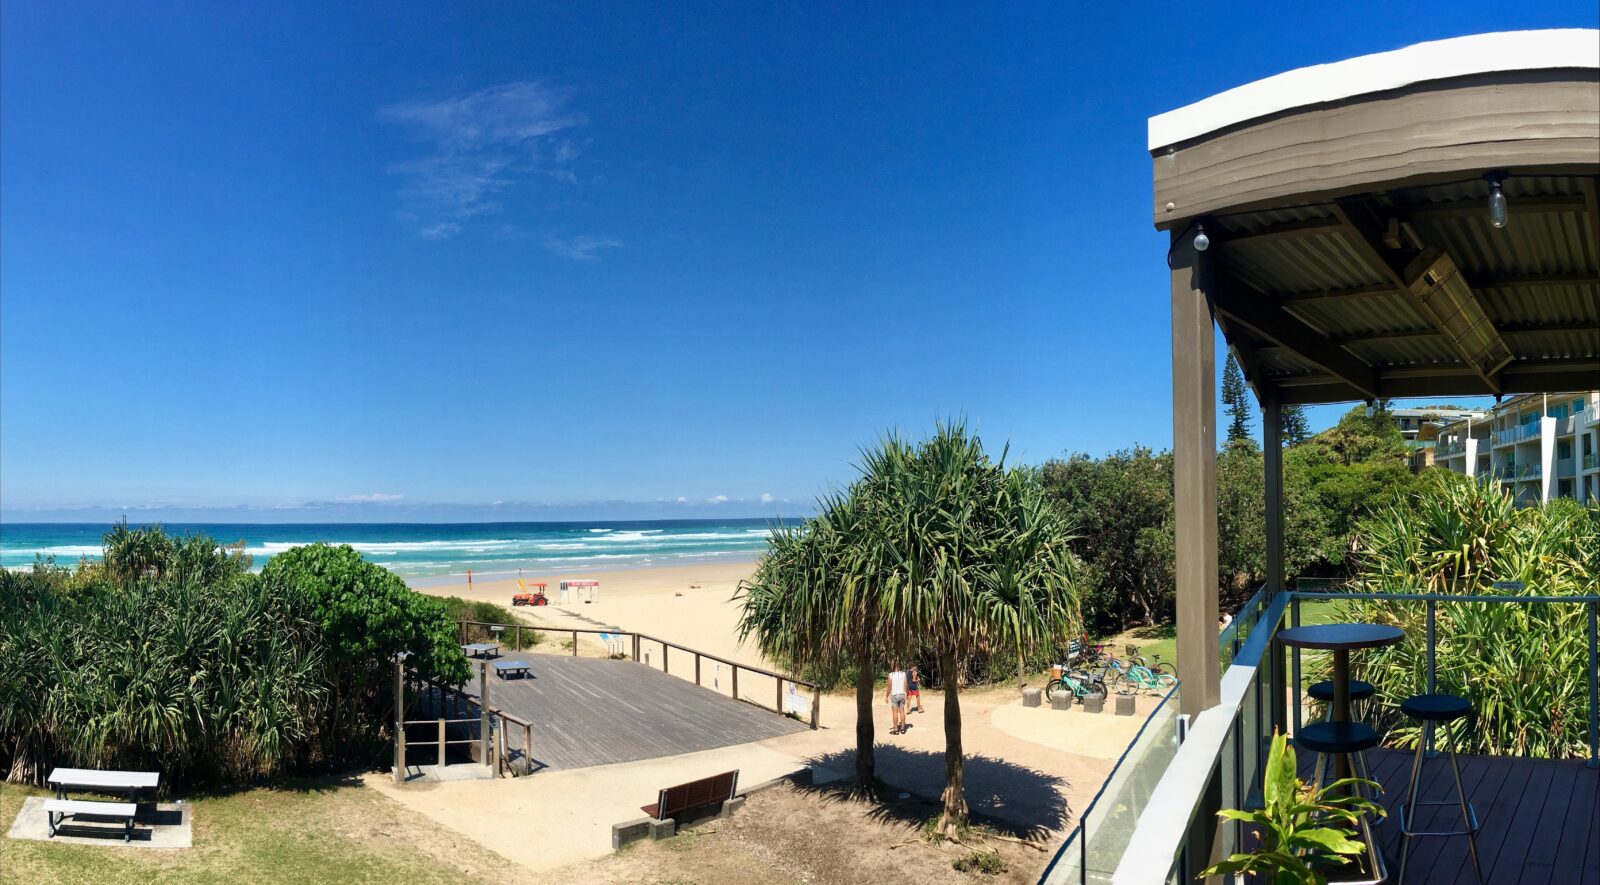 A view of the beach from Cabarita Beach SLSC's large covered deck.